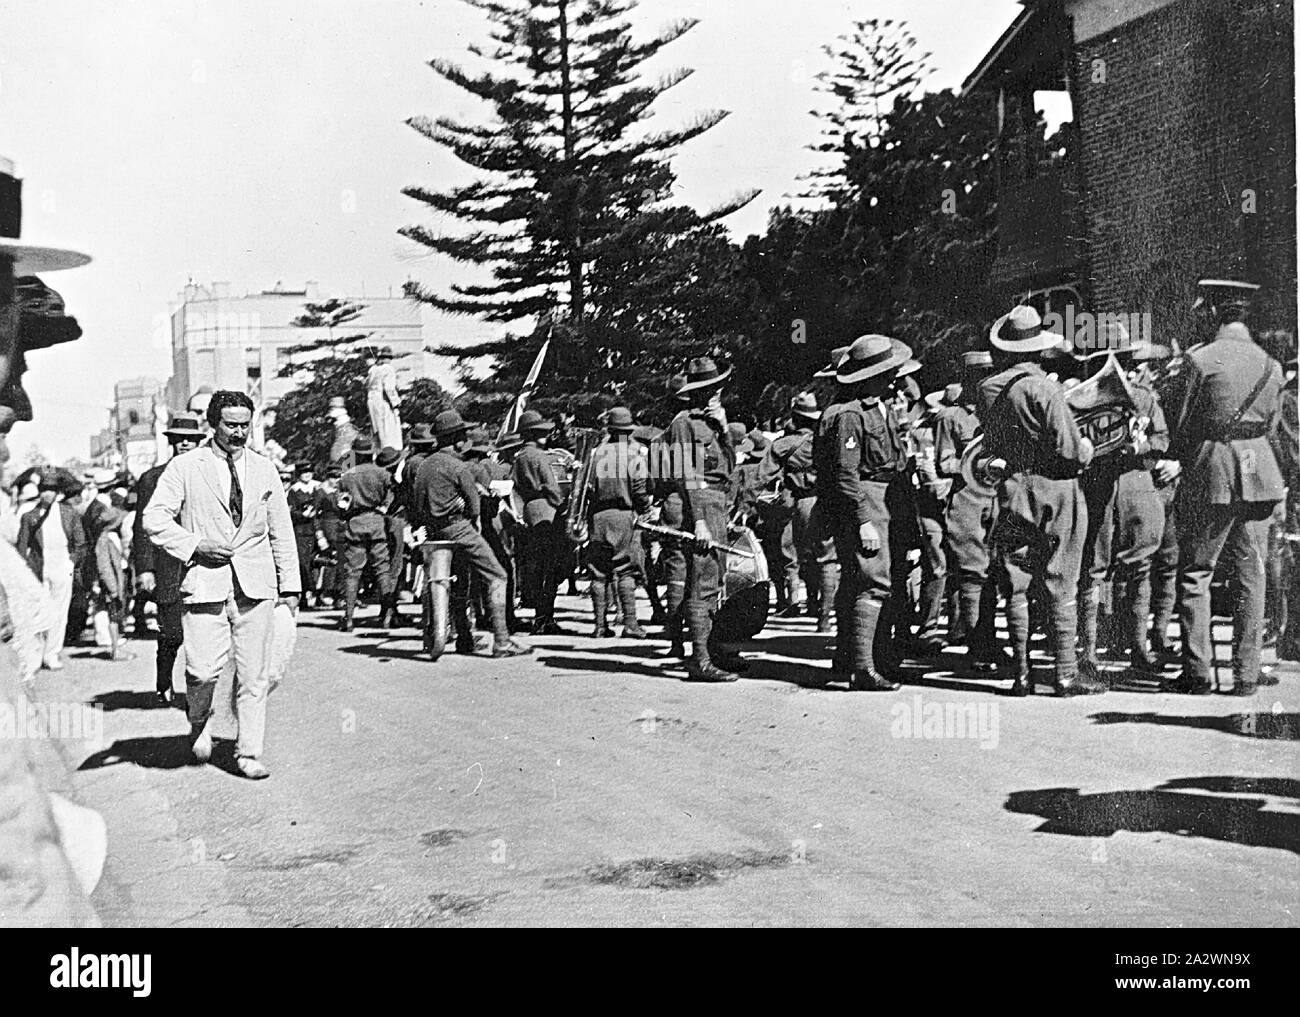 Negative - Scout Parade at the Manly Recreation Grounds, Manly, New South Wales, 1915, A scout parade at the Manly recreation grounds Stock Photo